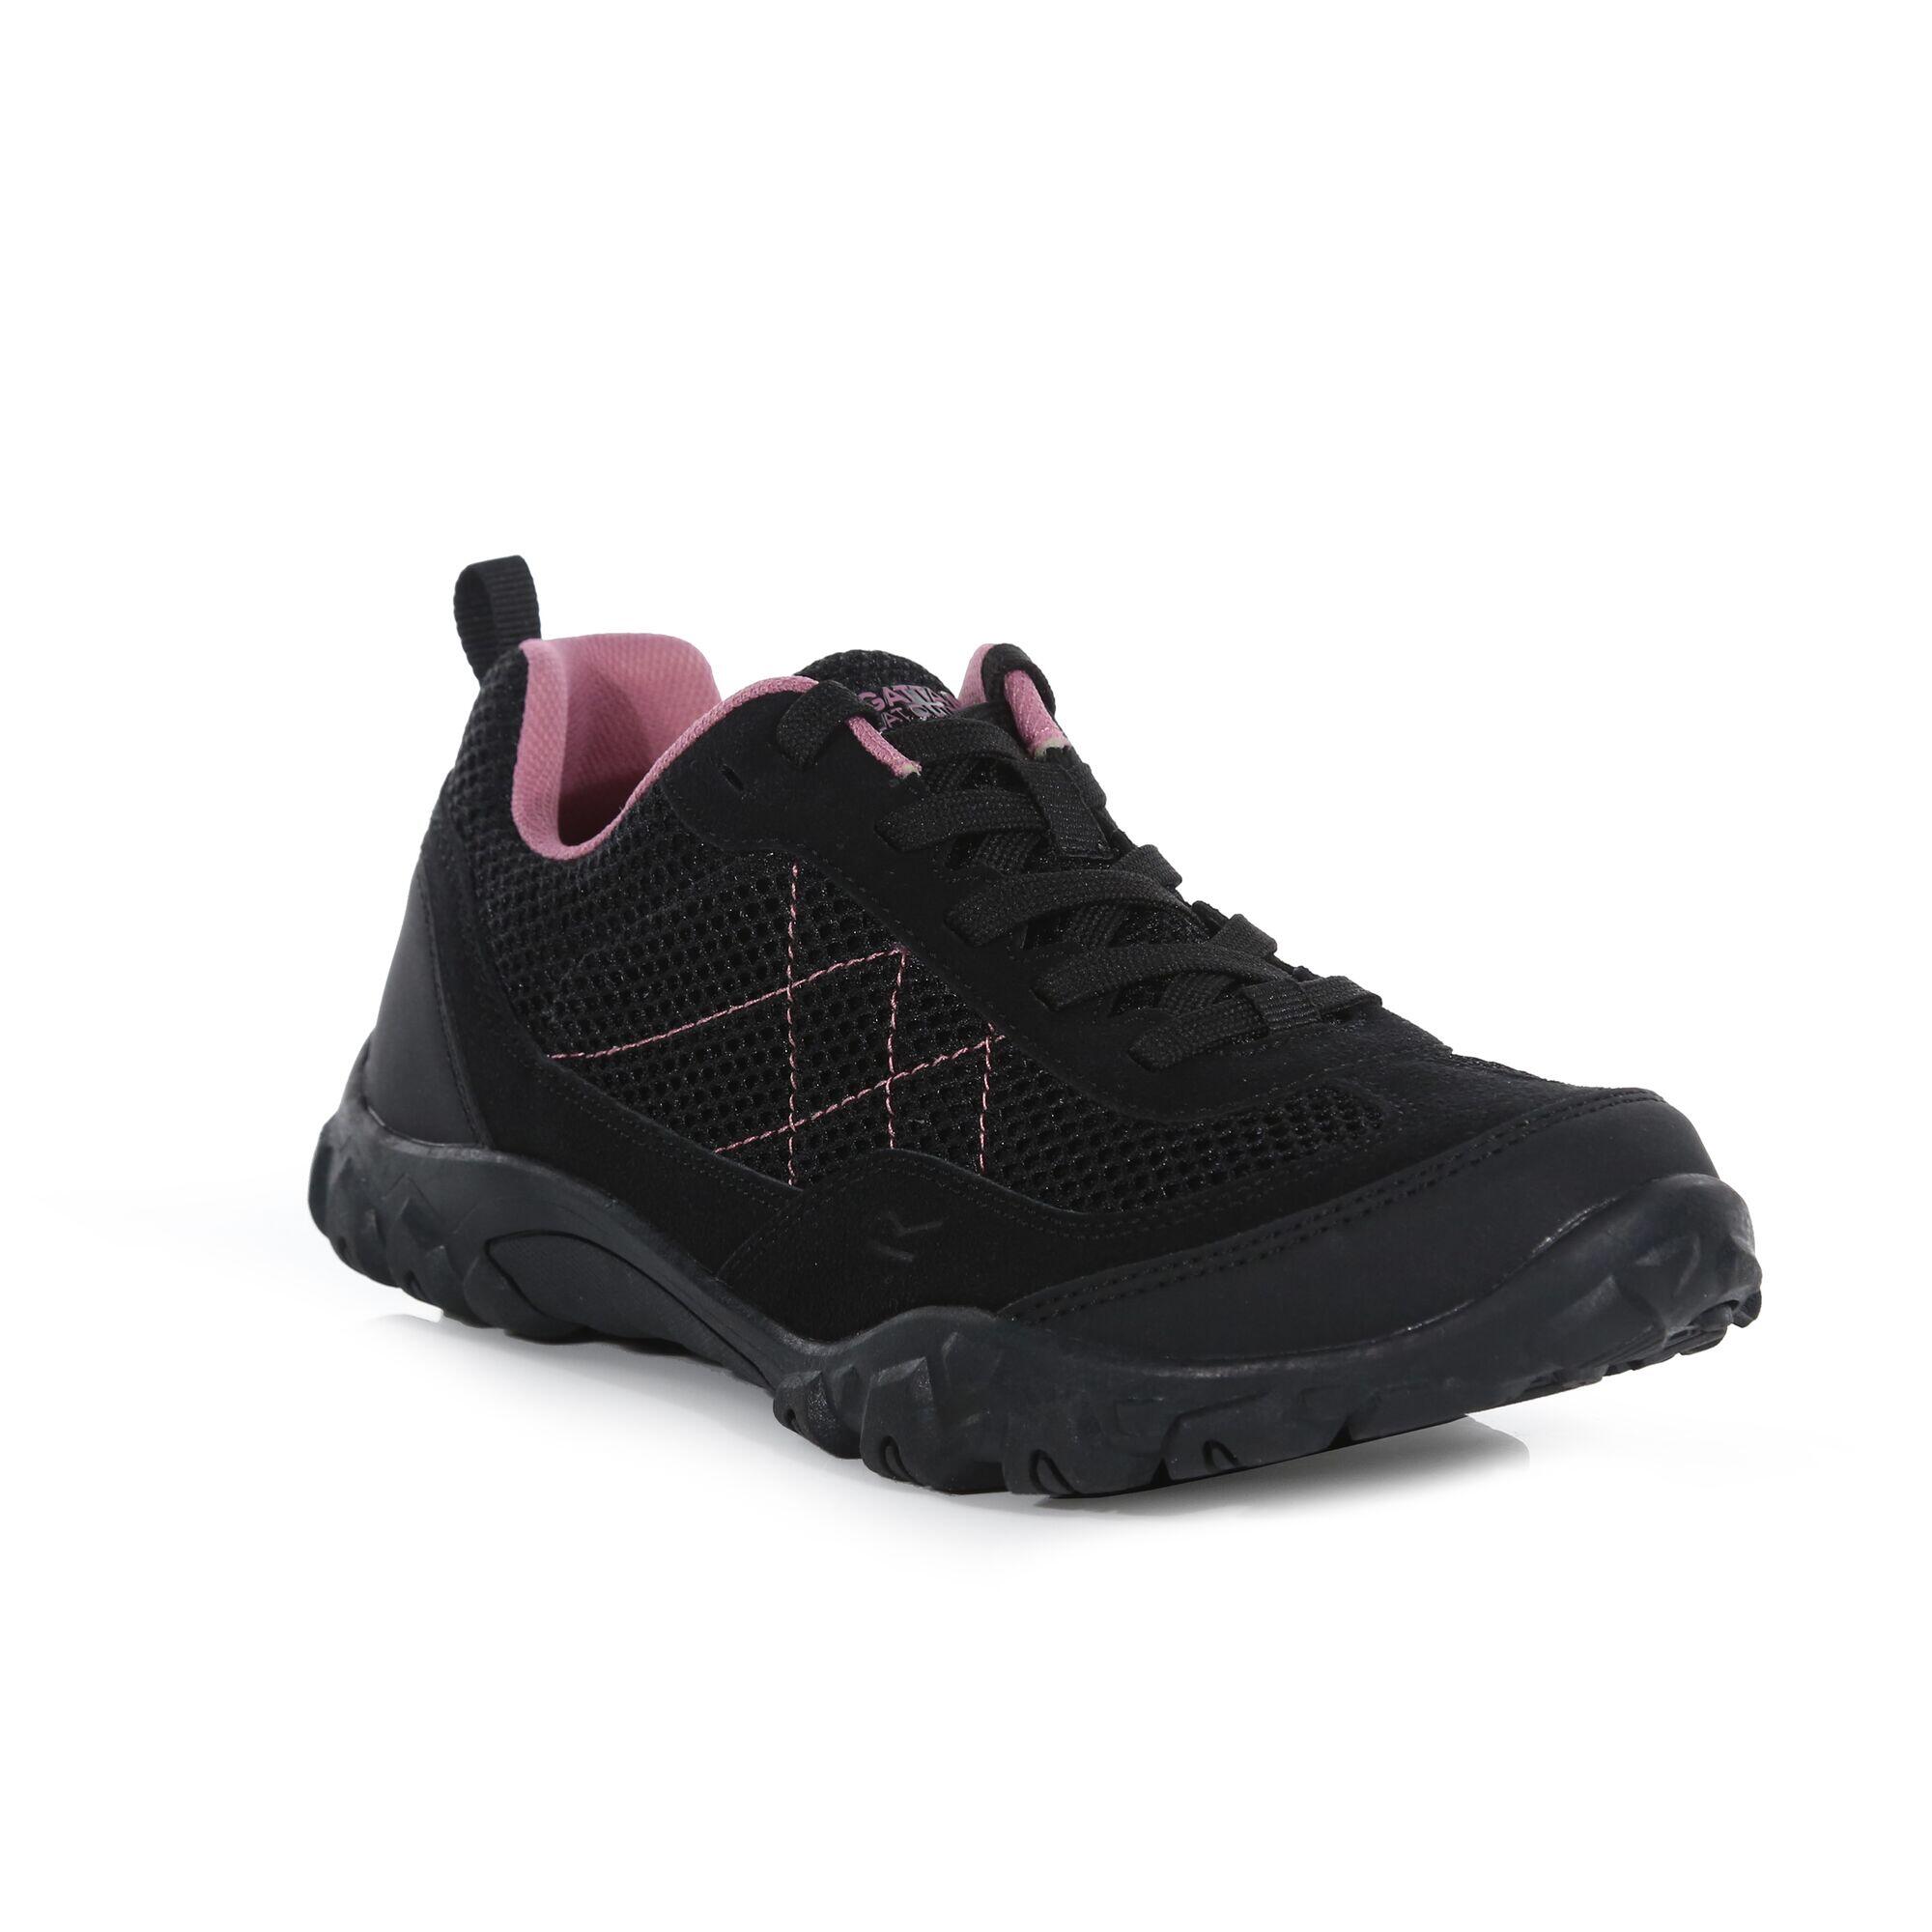 Lady Edgepoint Life Women's Walking Trainers - Black / Pink 2/6